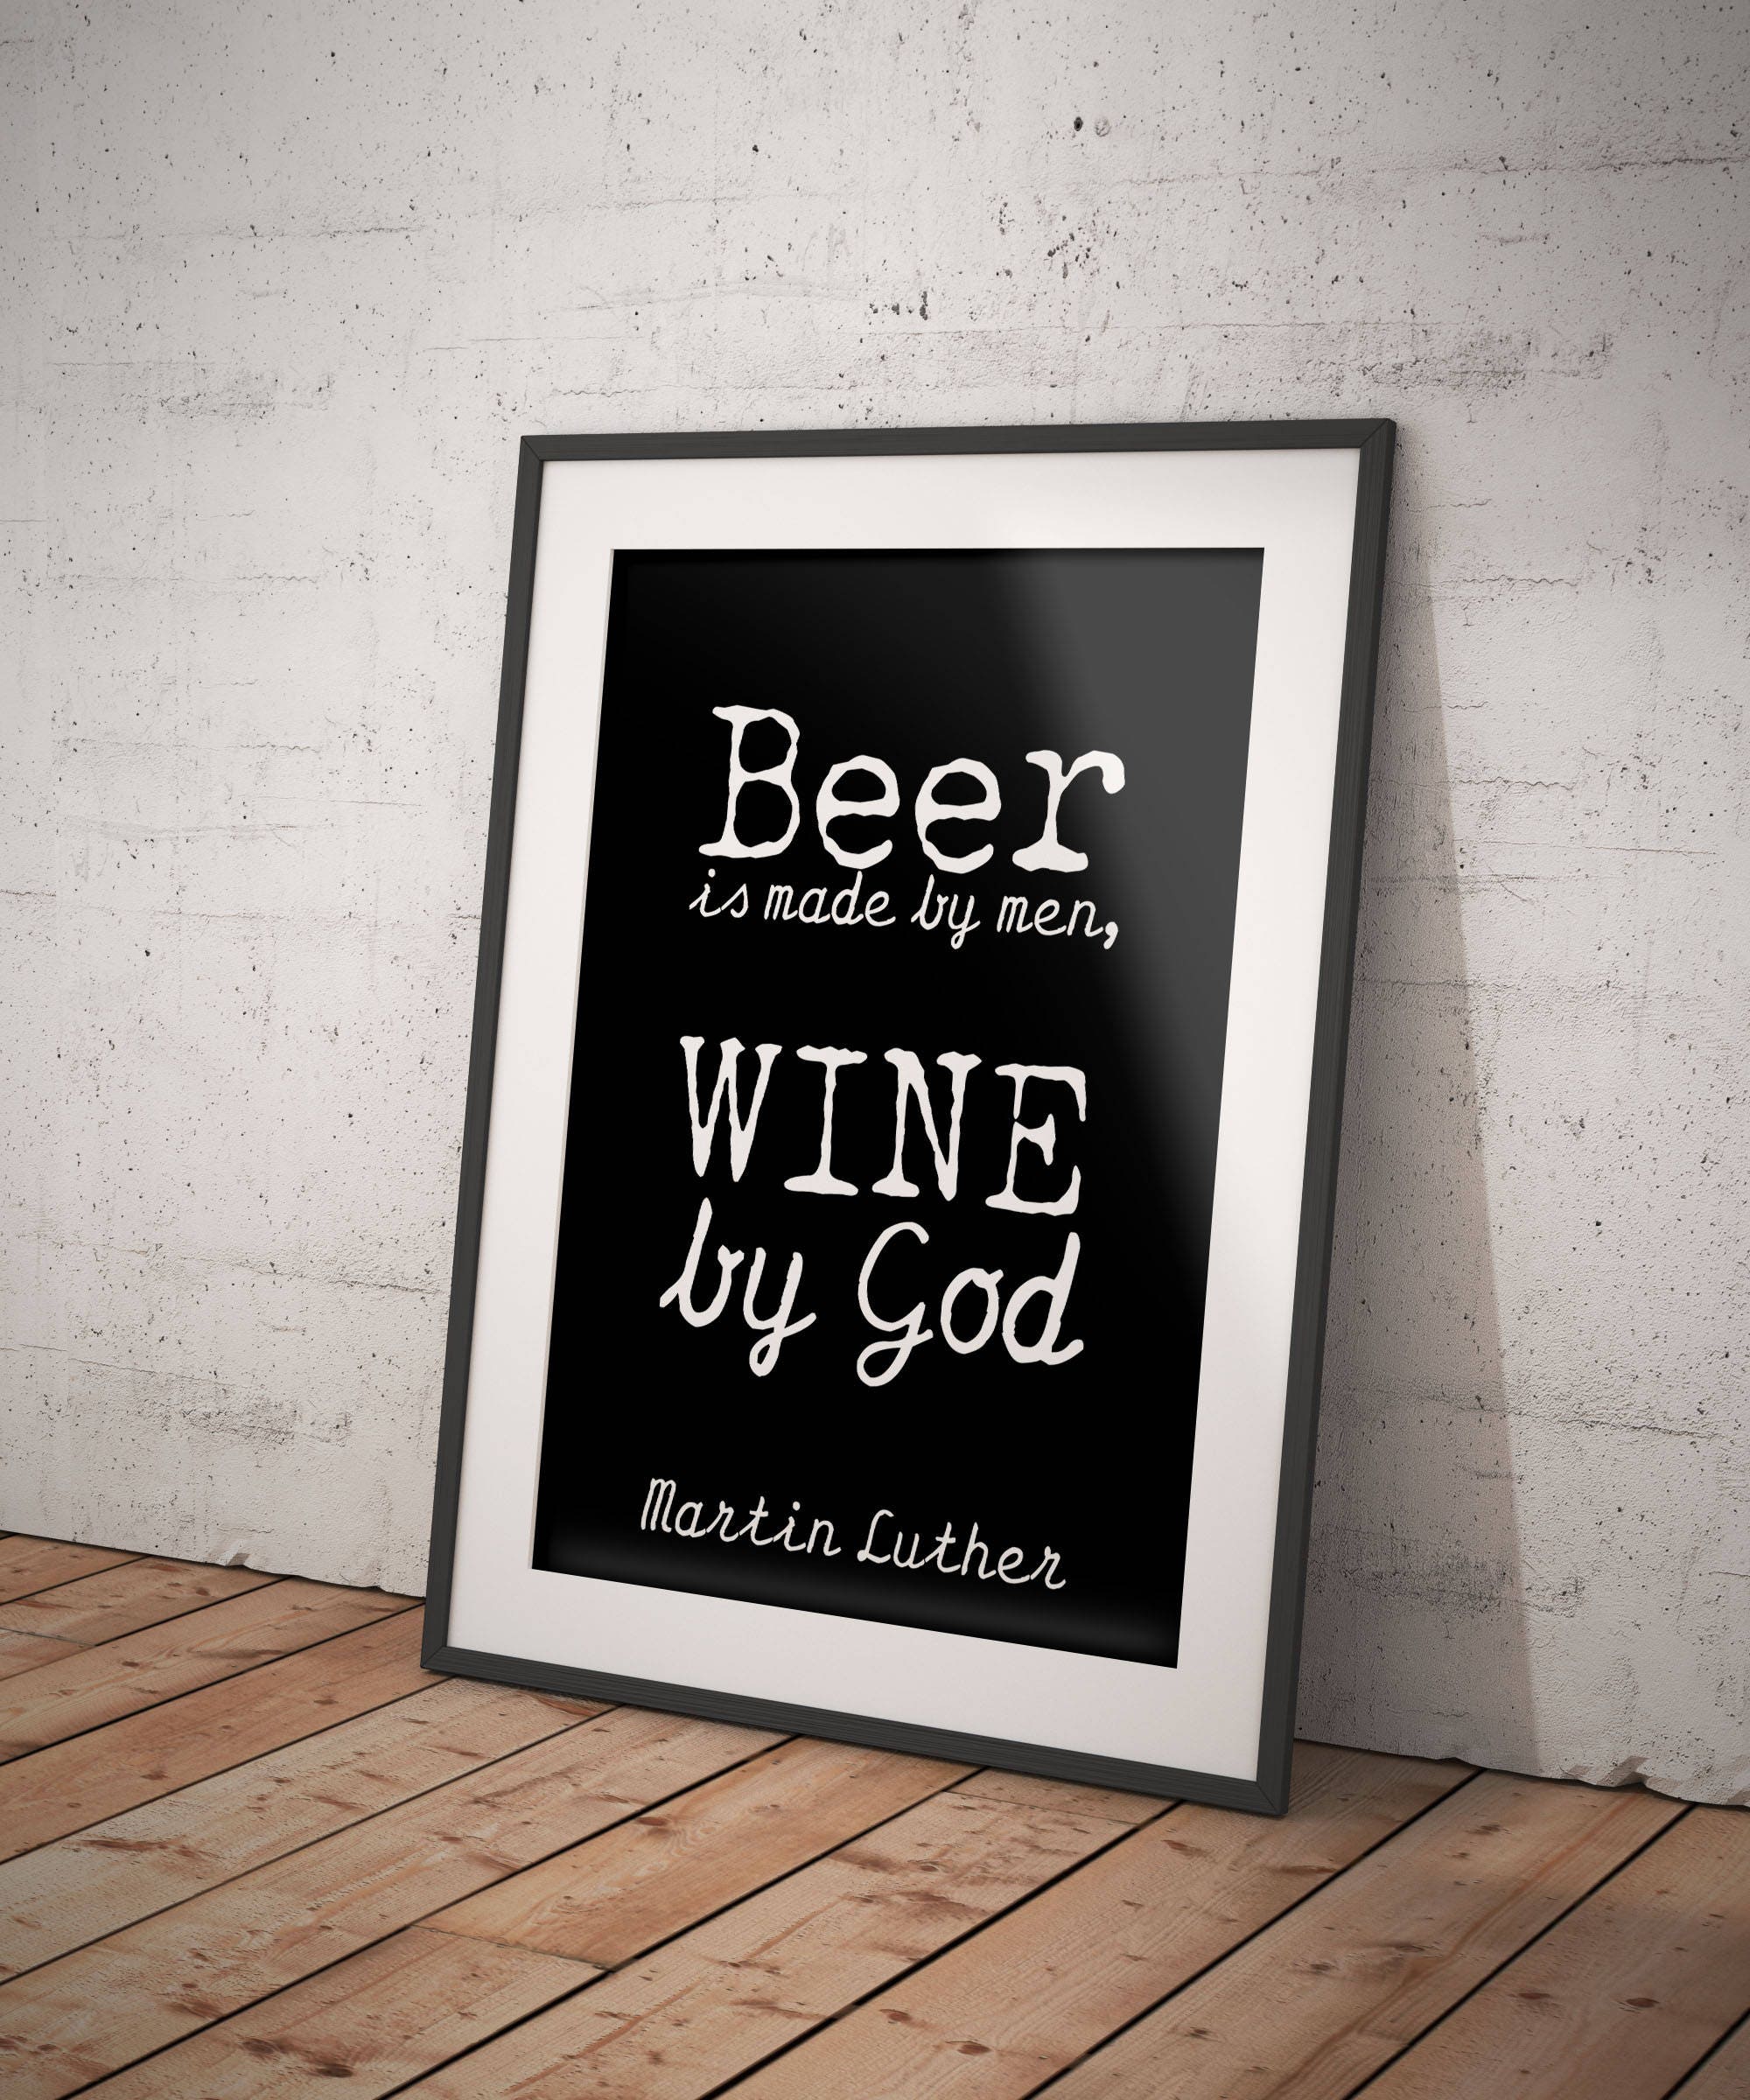 Martin Luther quote print for wine decor, beer is made by man wine by God quote poster print in black & white Unframed